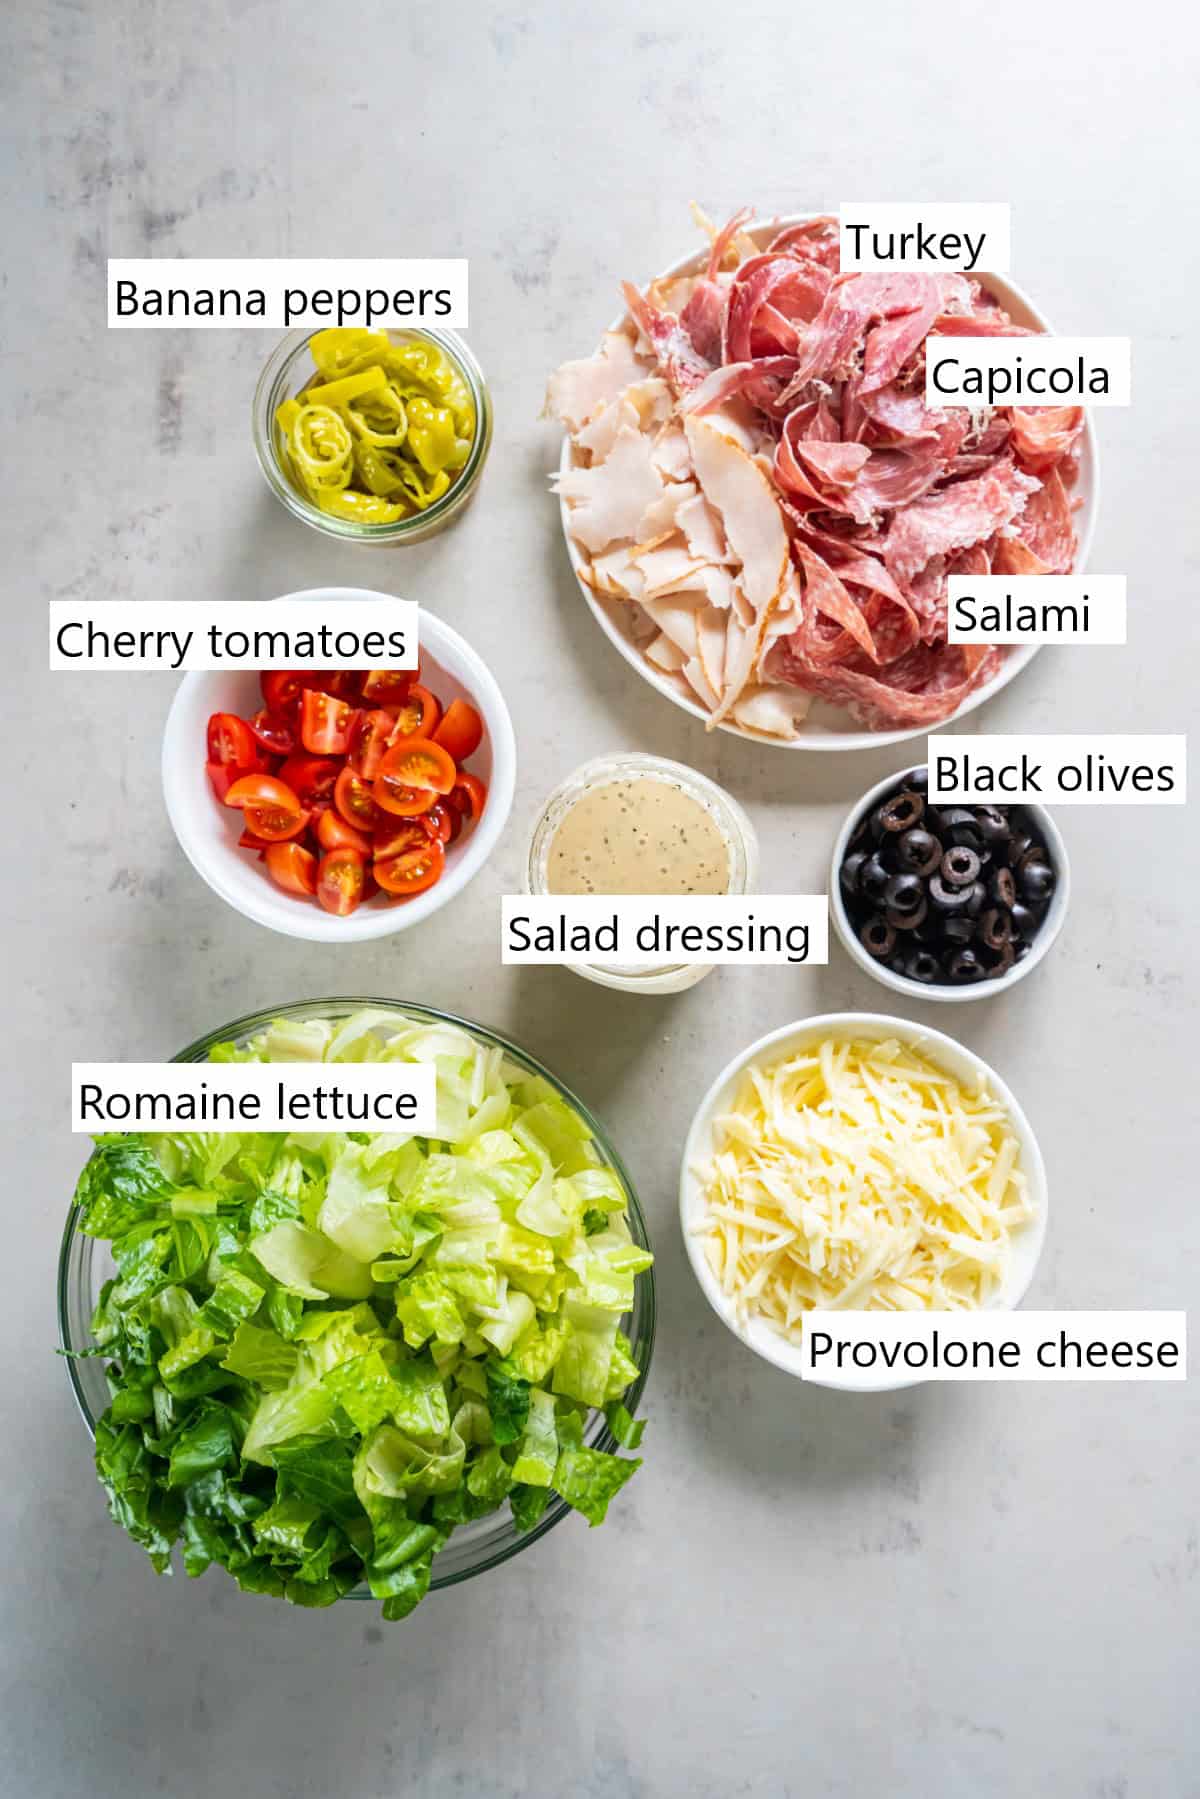 The ingredients to make a grinder salad in separate containers.